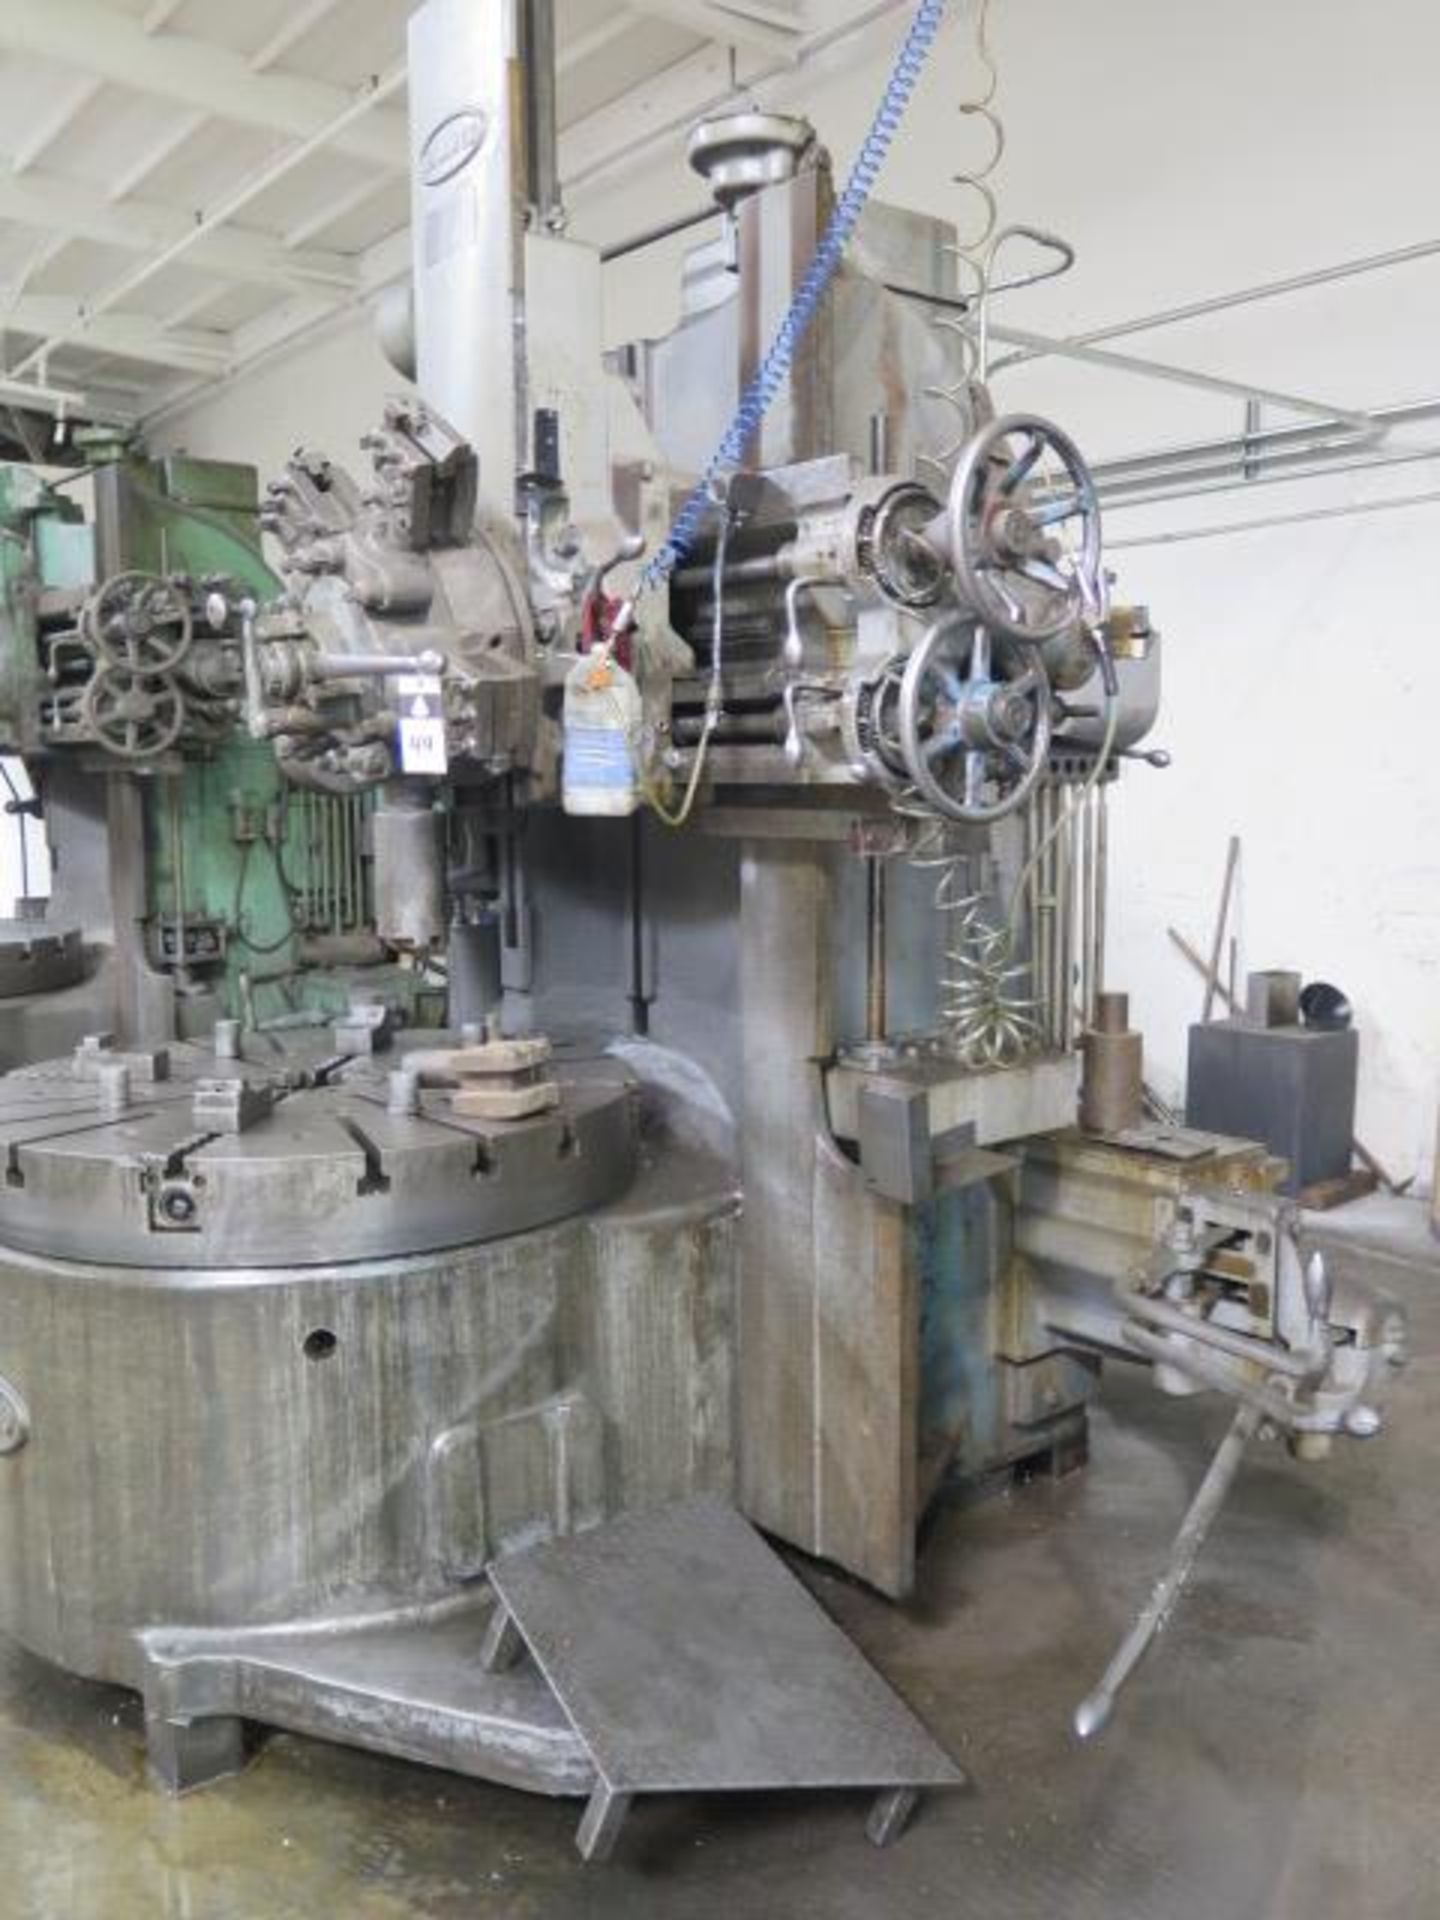 Bullard 50” Vertical Turret Lathe s/n 20938 w/ 5-Station Turret, 50" Chuck, 57" Swing, SOLD AS IS - Image 5 of 14